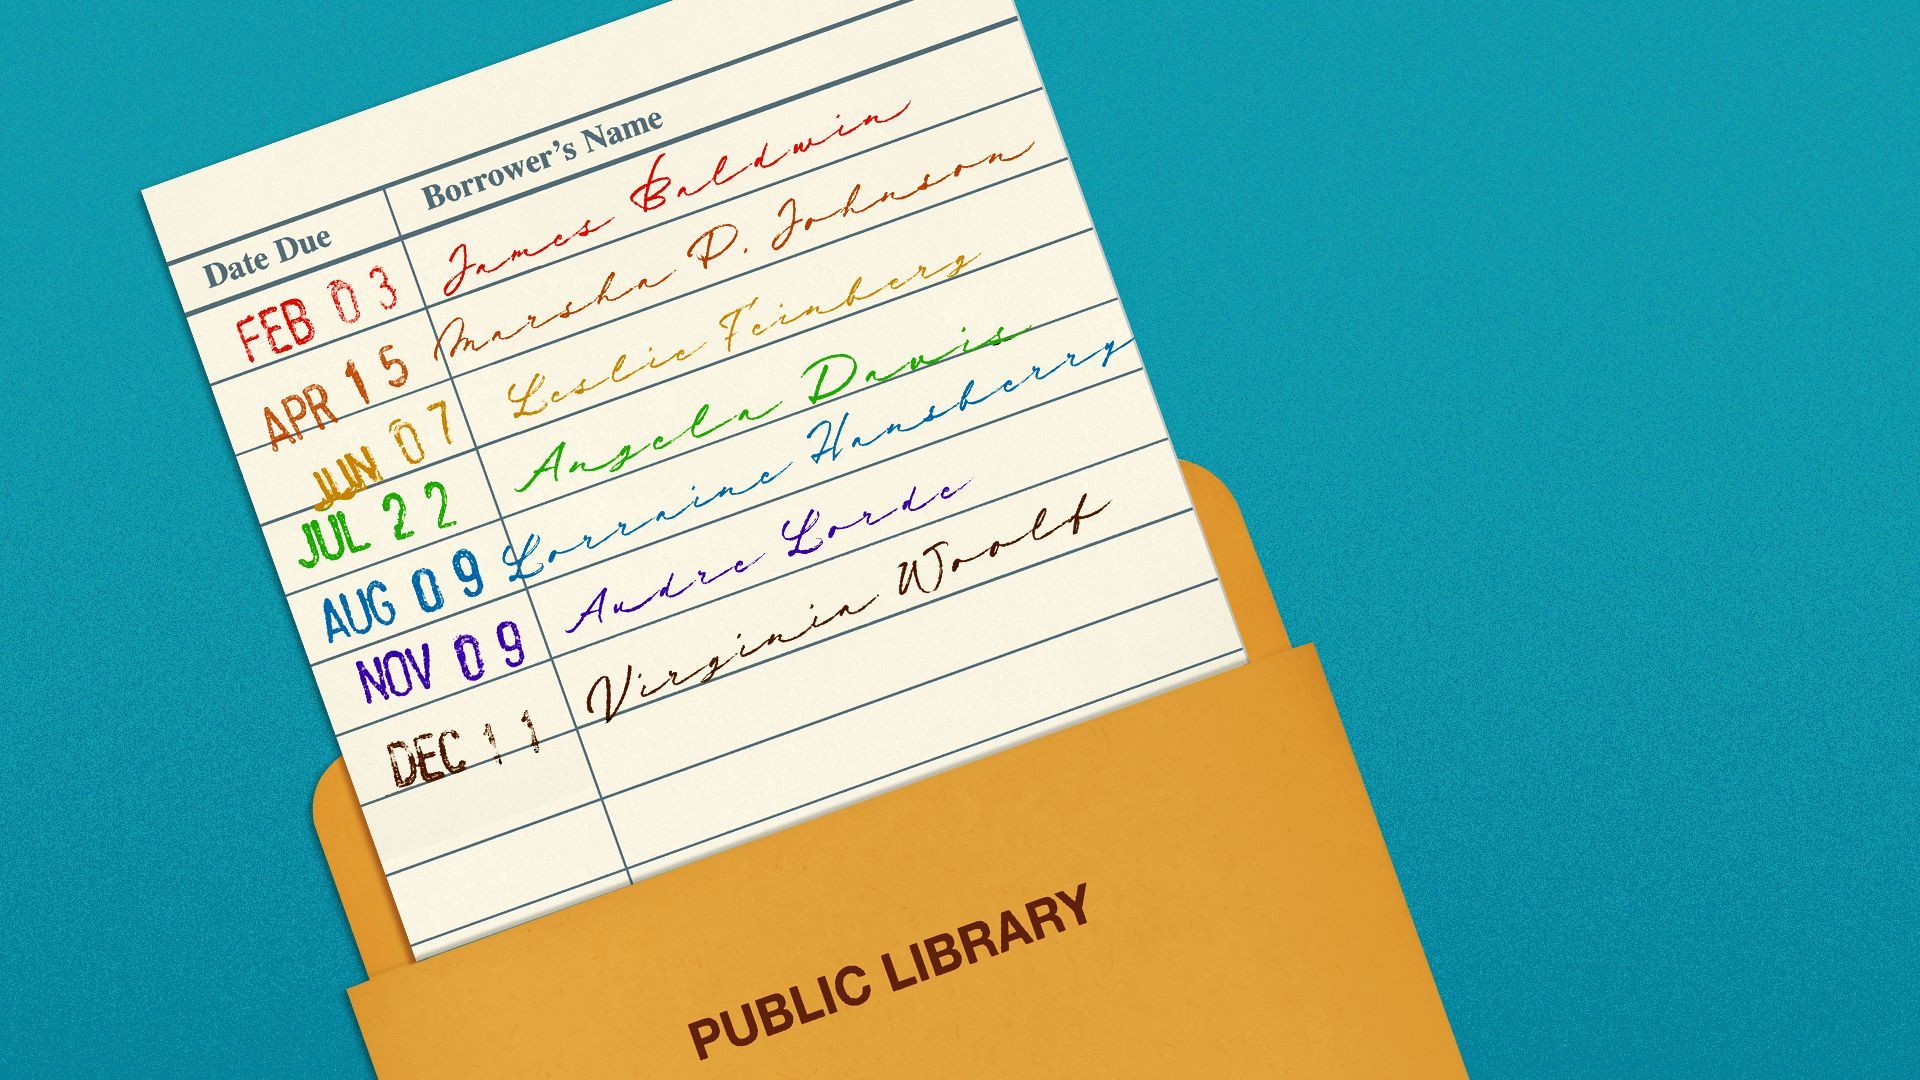 Illustration of a library due date card with the names of queer authors and activists written in rainbow colors.